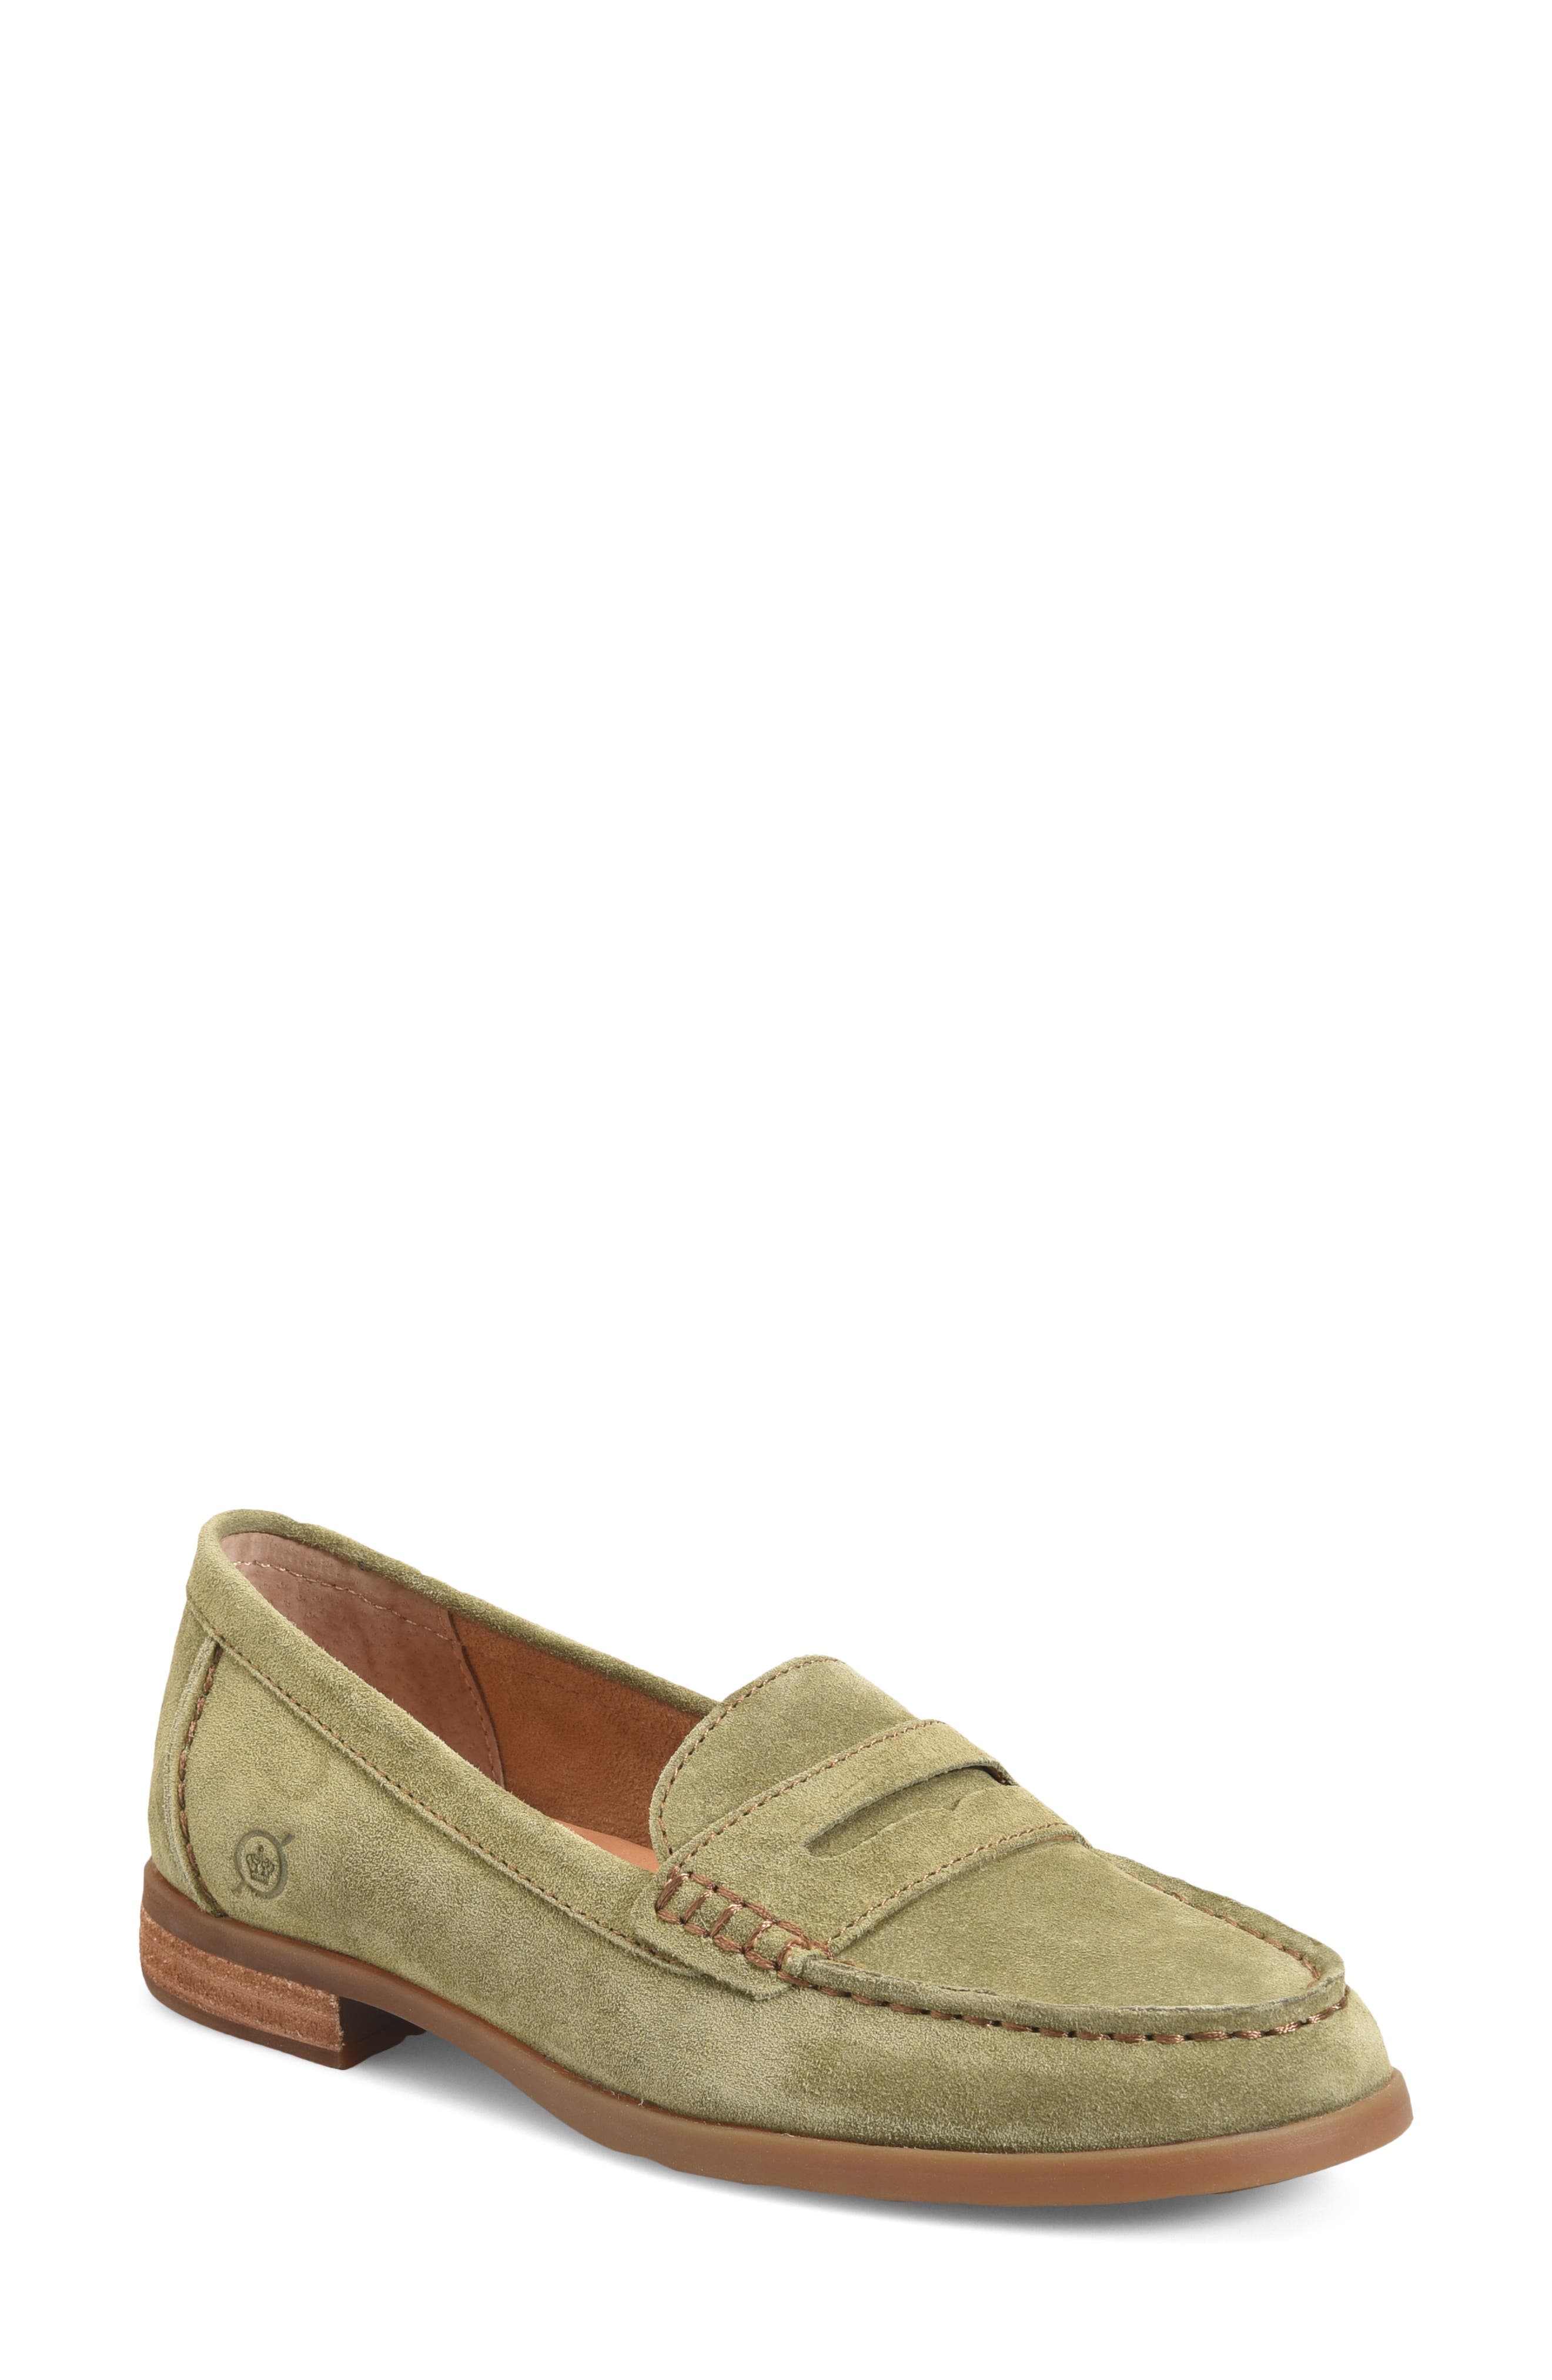 Buy > green colour loafers > in stock